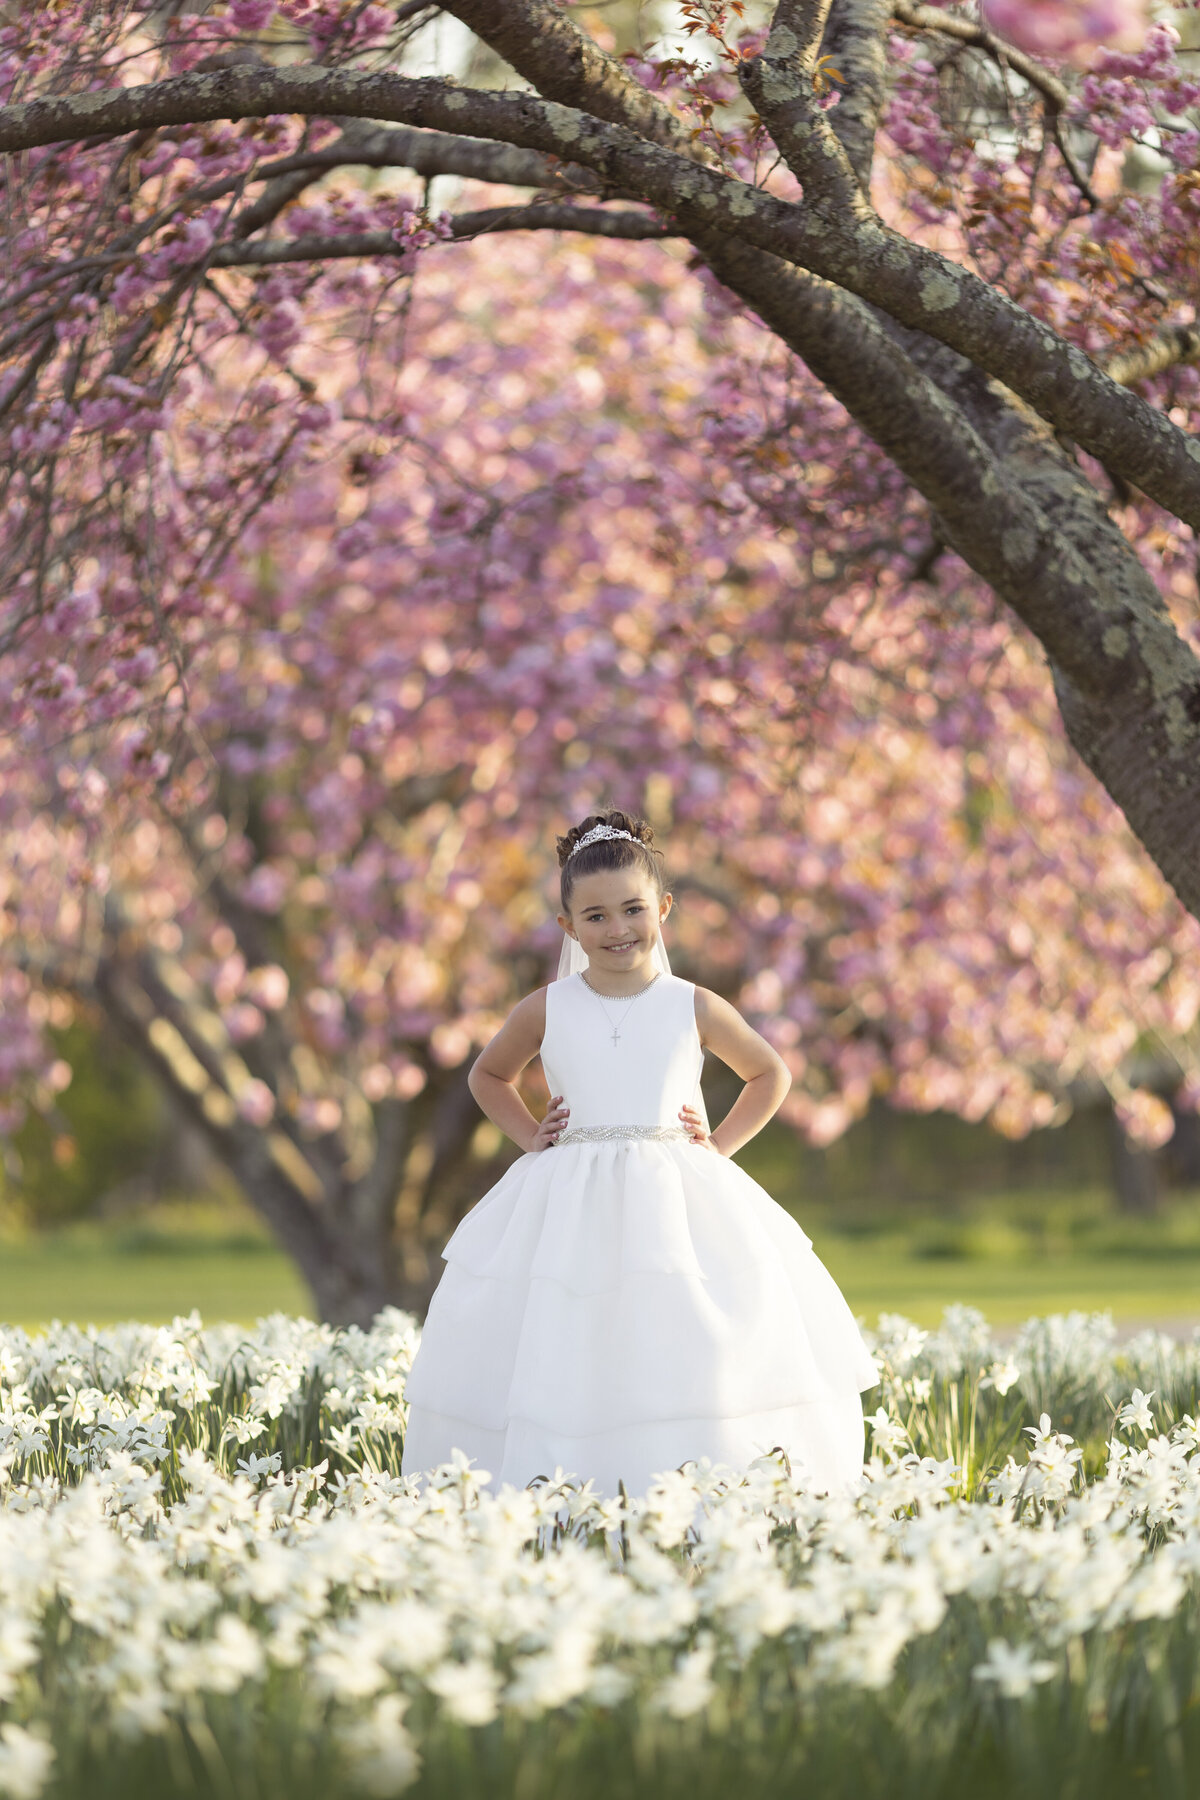 A proud young girl wearing a long white silk dress with hands on her hips stands in a field of flowers